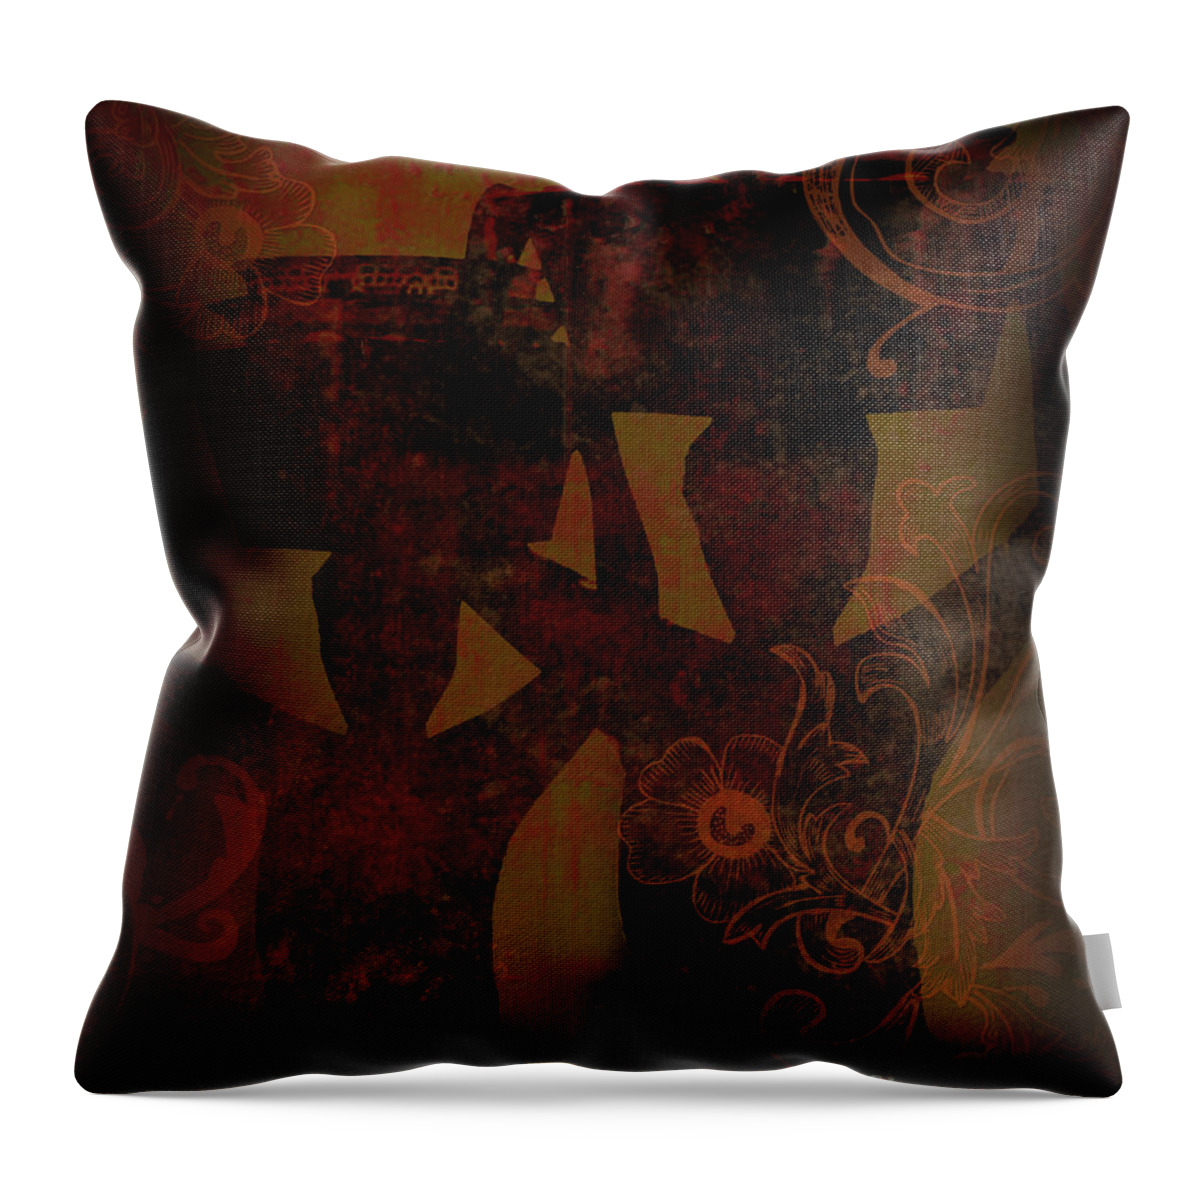 Abstracts Throw Pillow featuring the photograph Food for Thought by Lisa Lambert-Shank